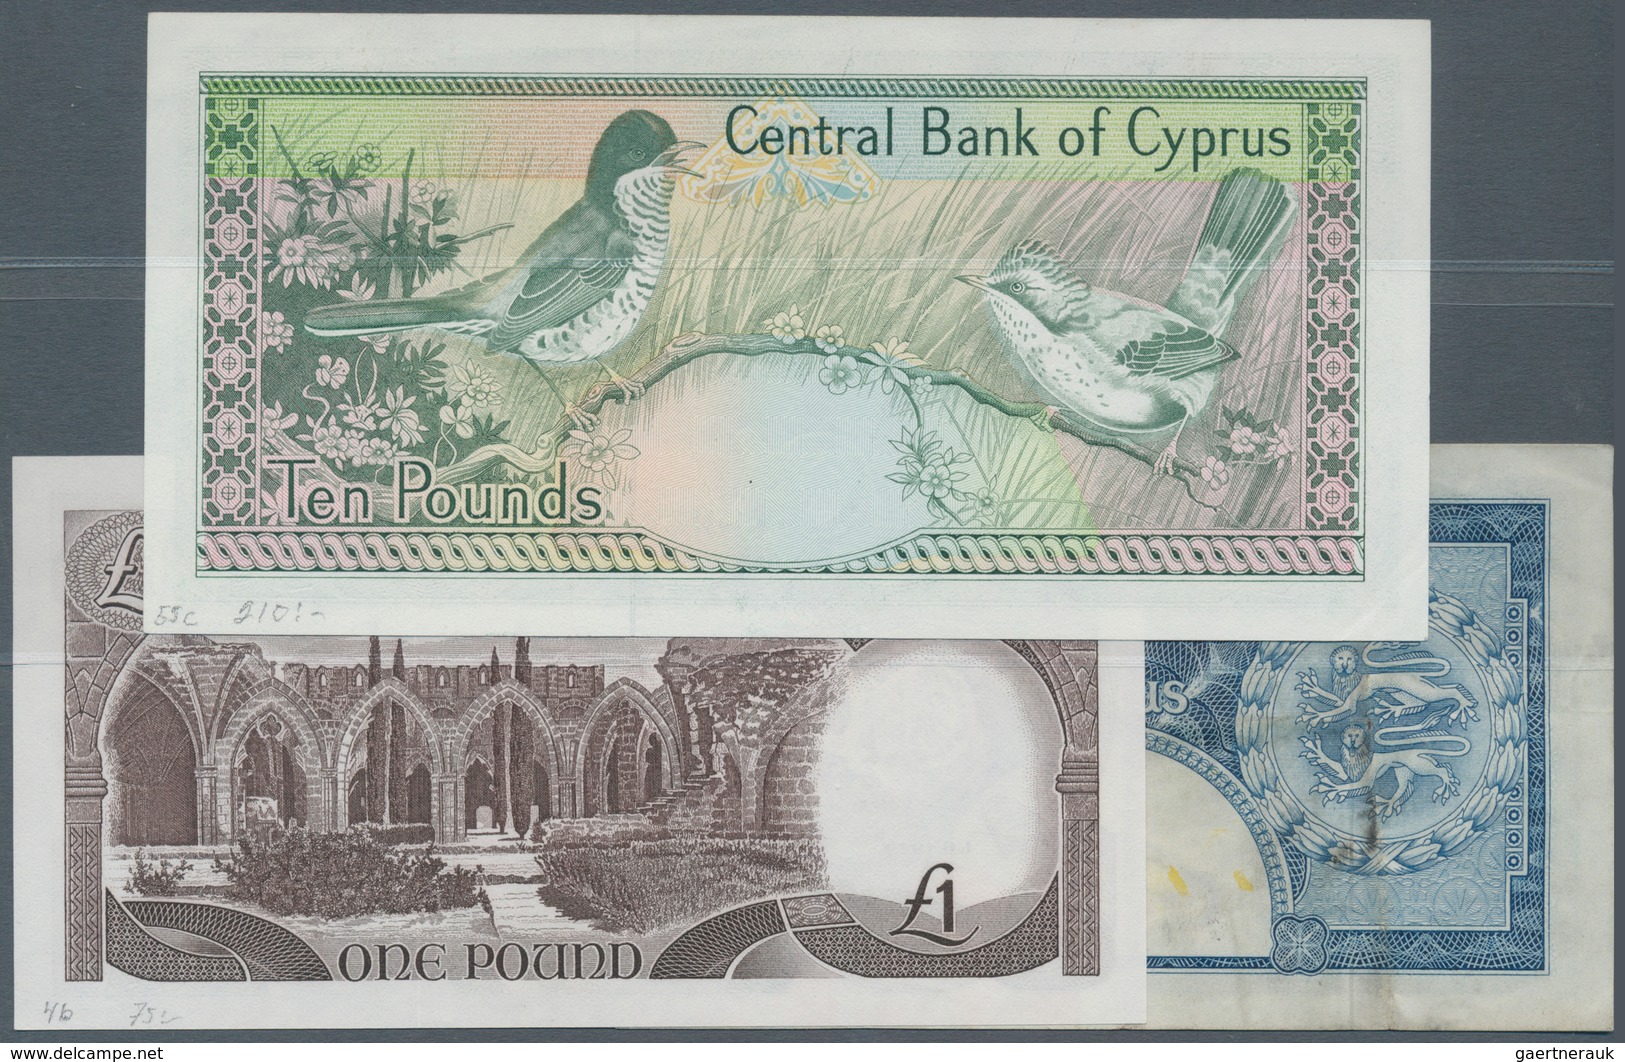 Cyprus / Zypern: Very Nice Set With 3 Banknotes 250 Mils 1955 P.33a In F+, 1 Pound 1979 P.46 In XF A - Zypern